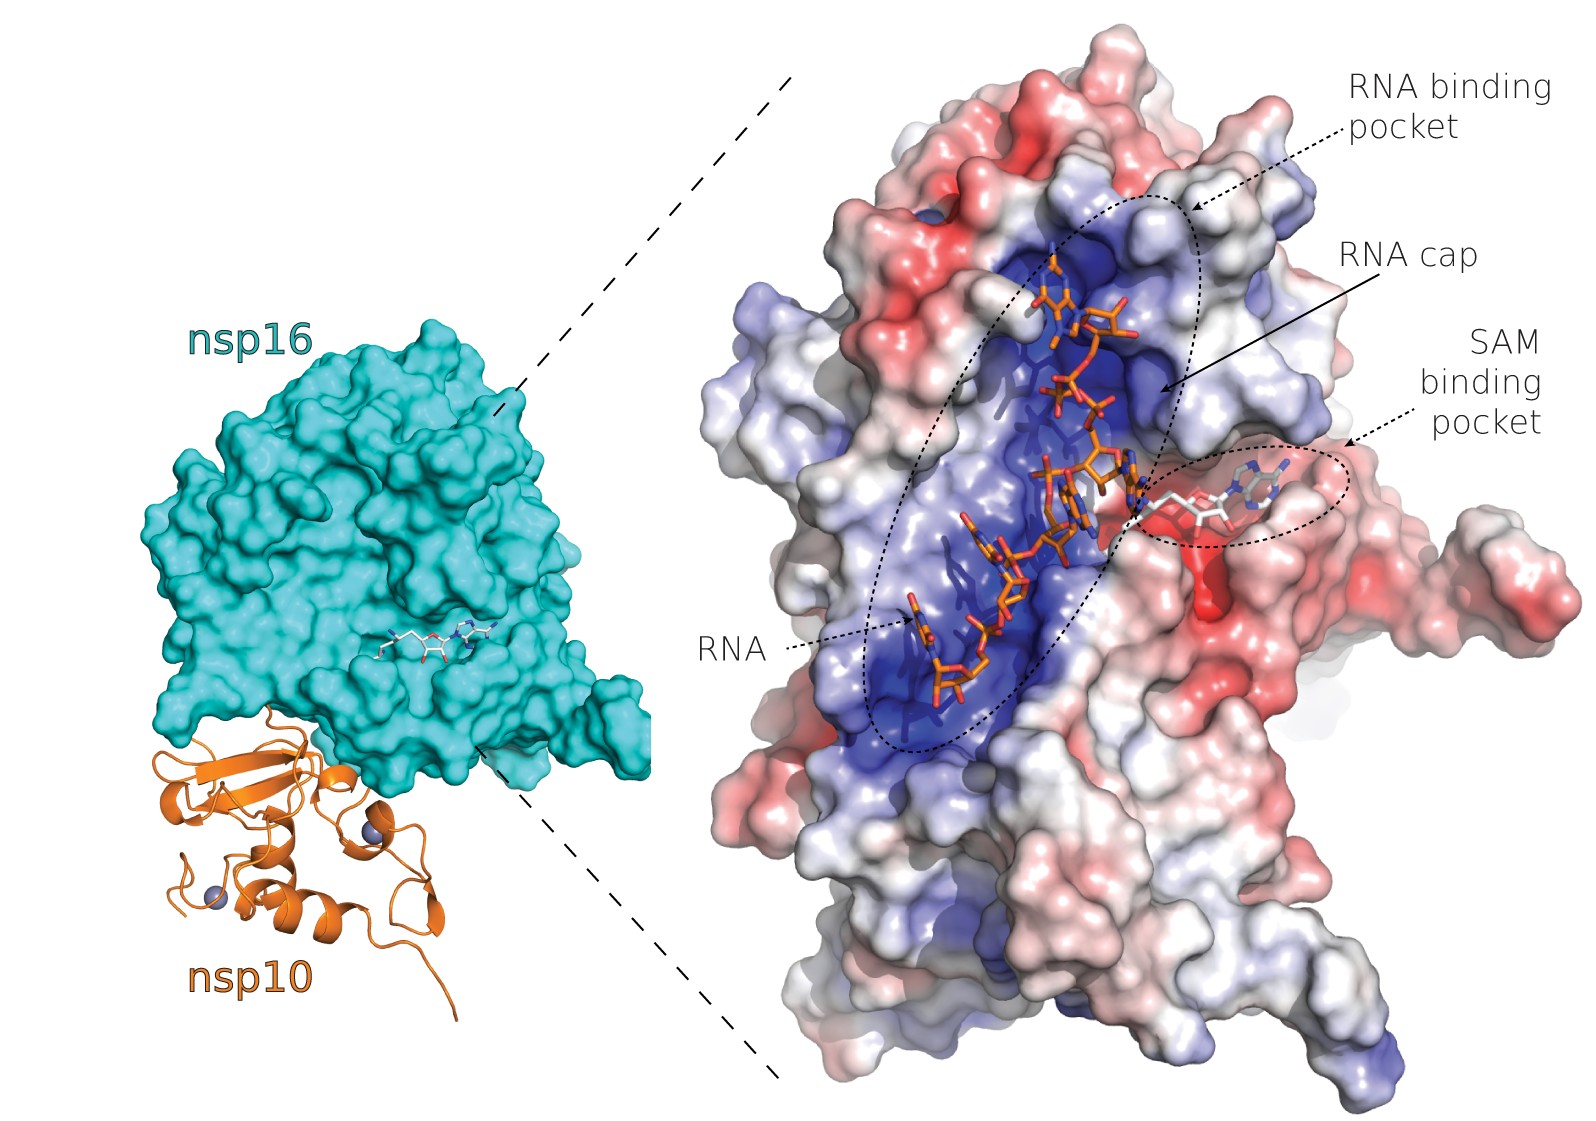 Researchers Describe Structure of SARS-CoV-2 Proteins Suitable for Design of New Drugs